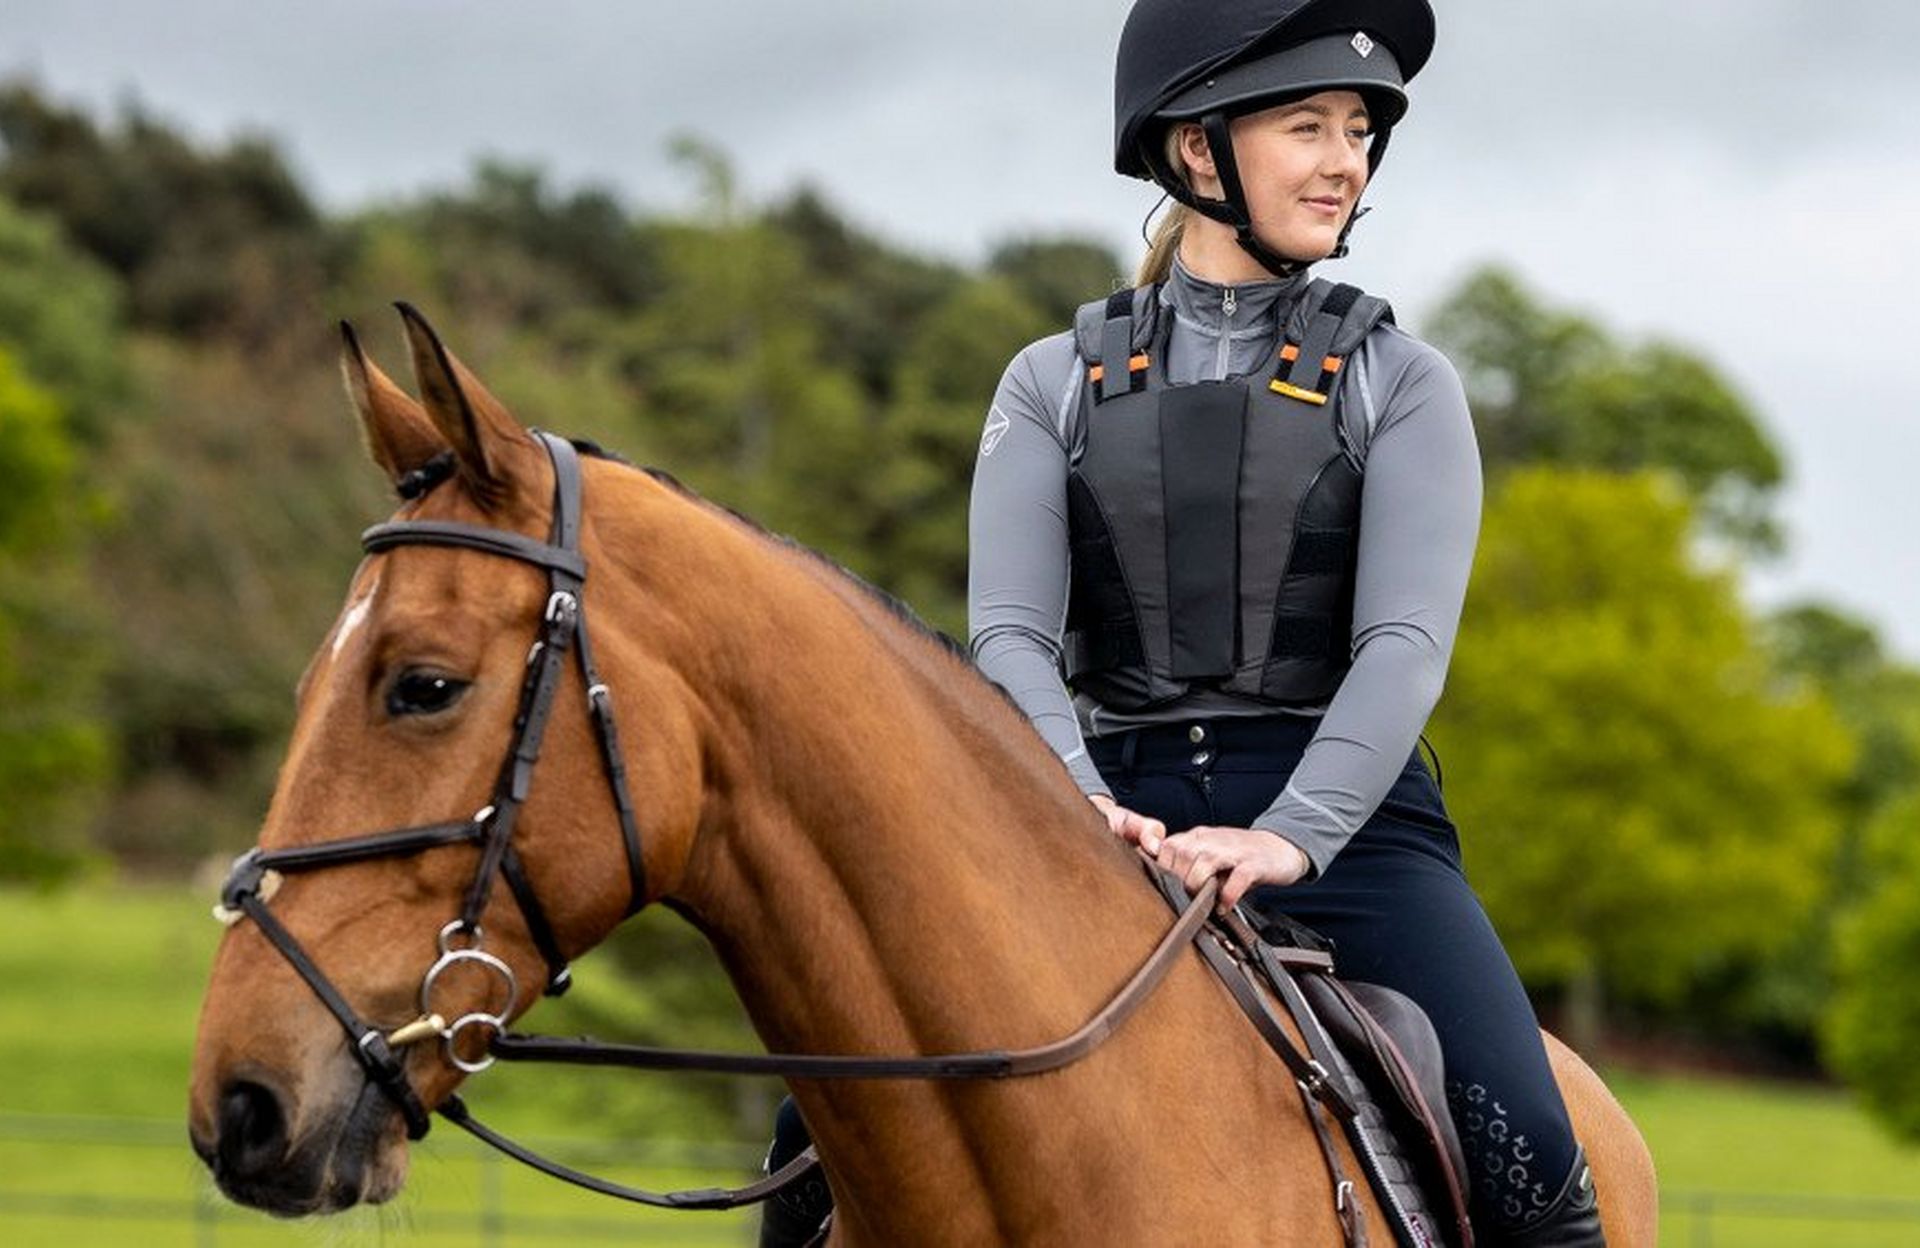 How To Fall Safely Off A Horse – Our Top Tips For Riders